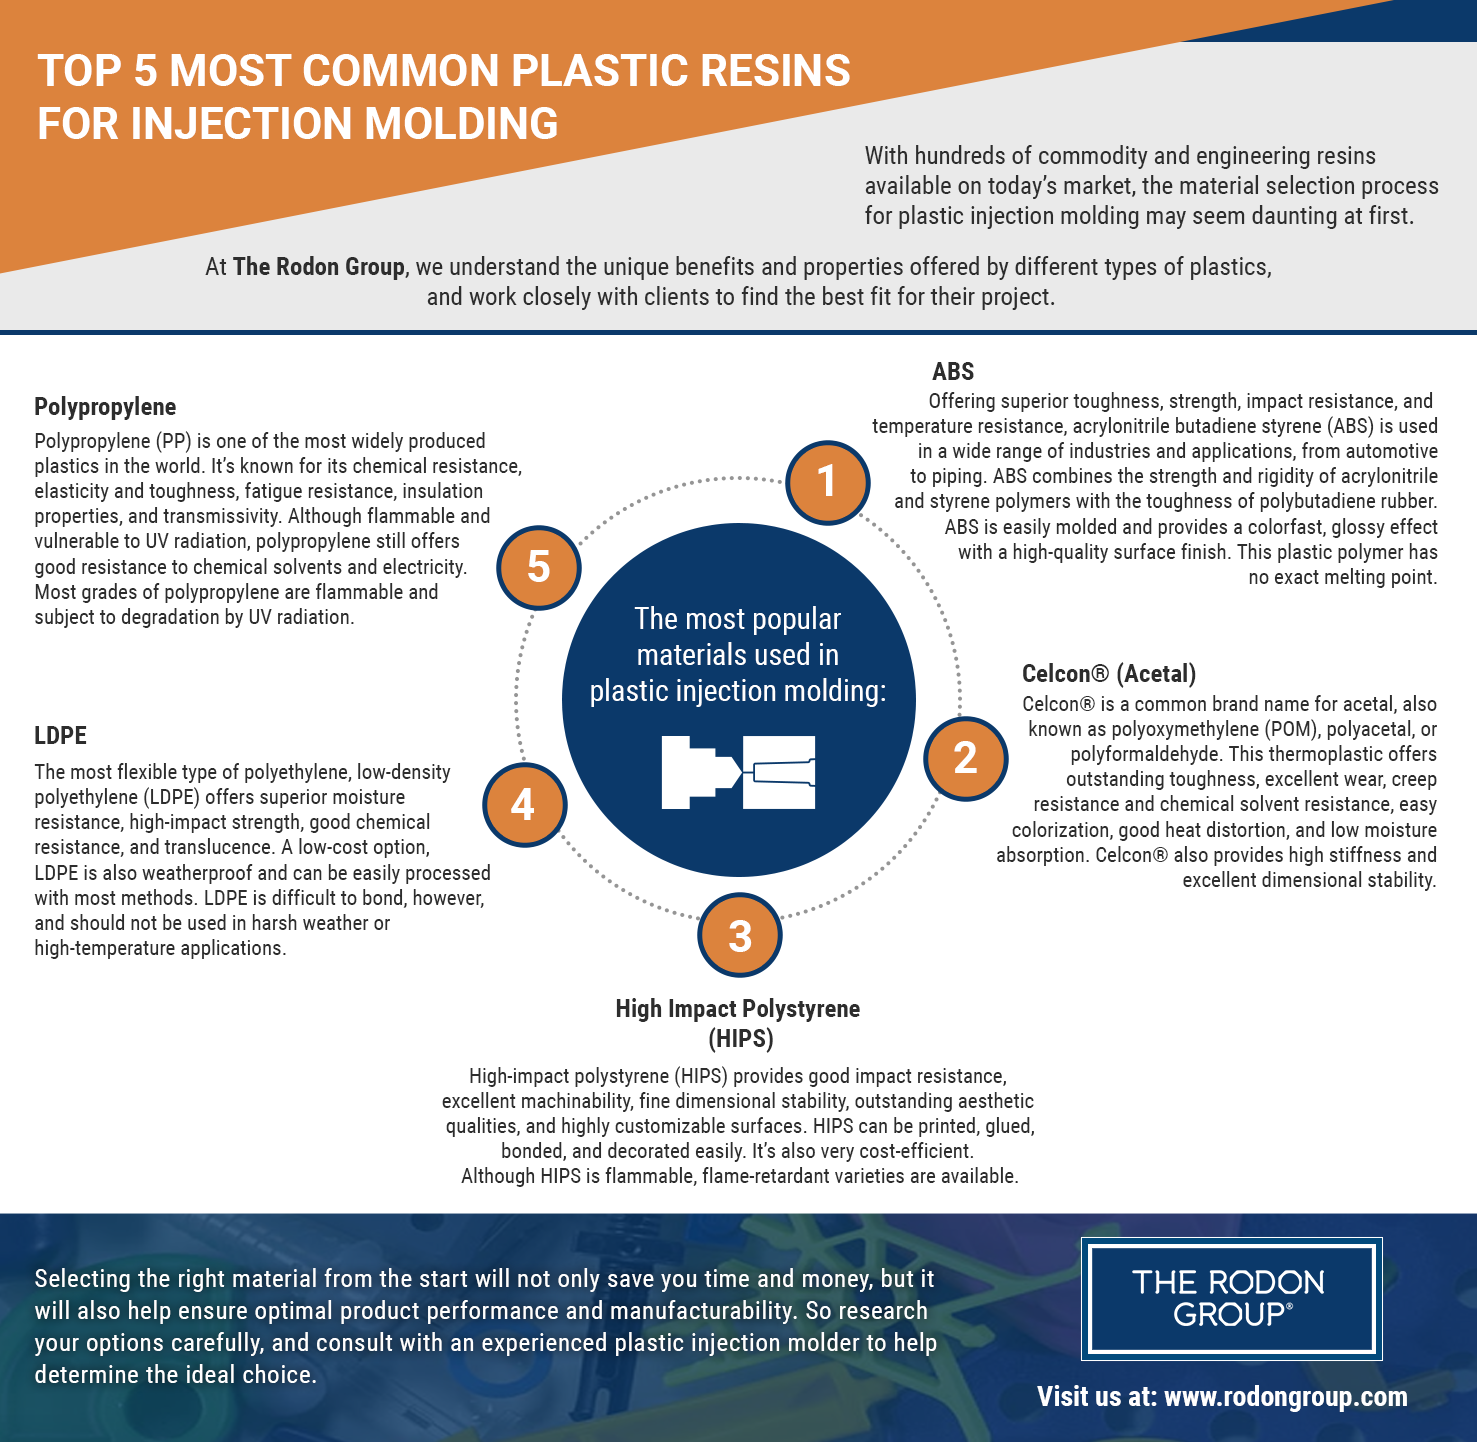 Top 5 Most Common Plastic for Injection Molding | The Rodon Group®